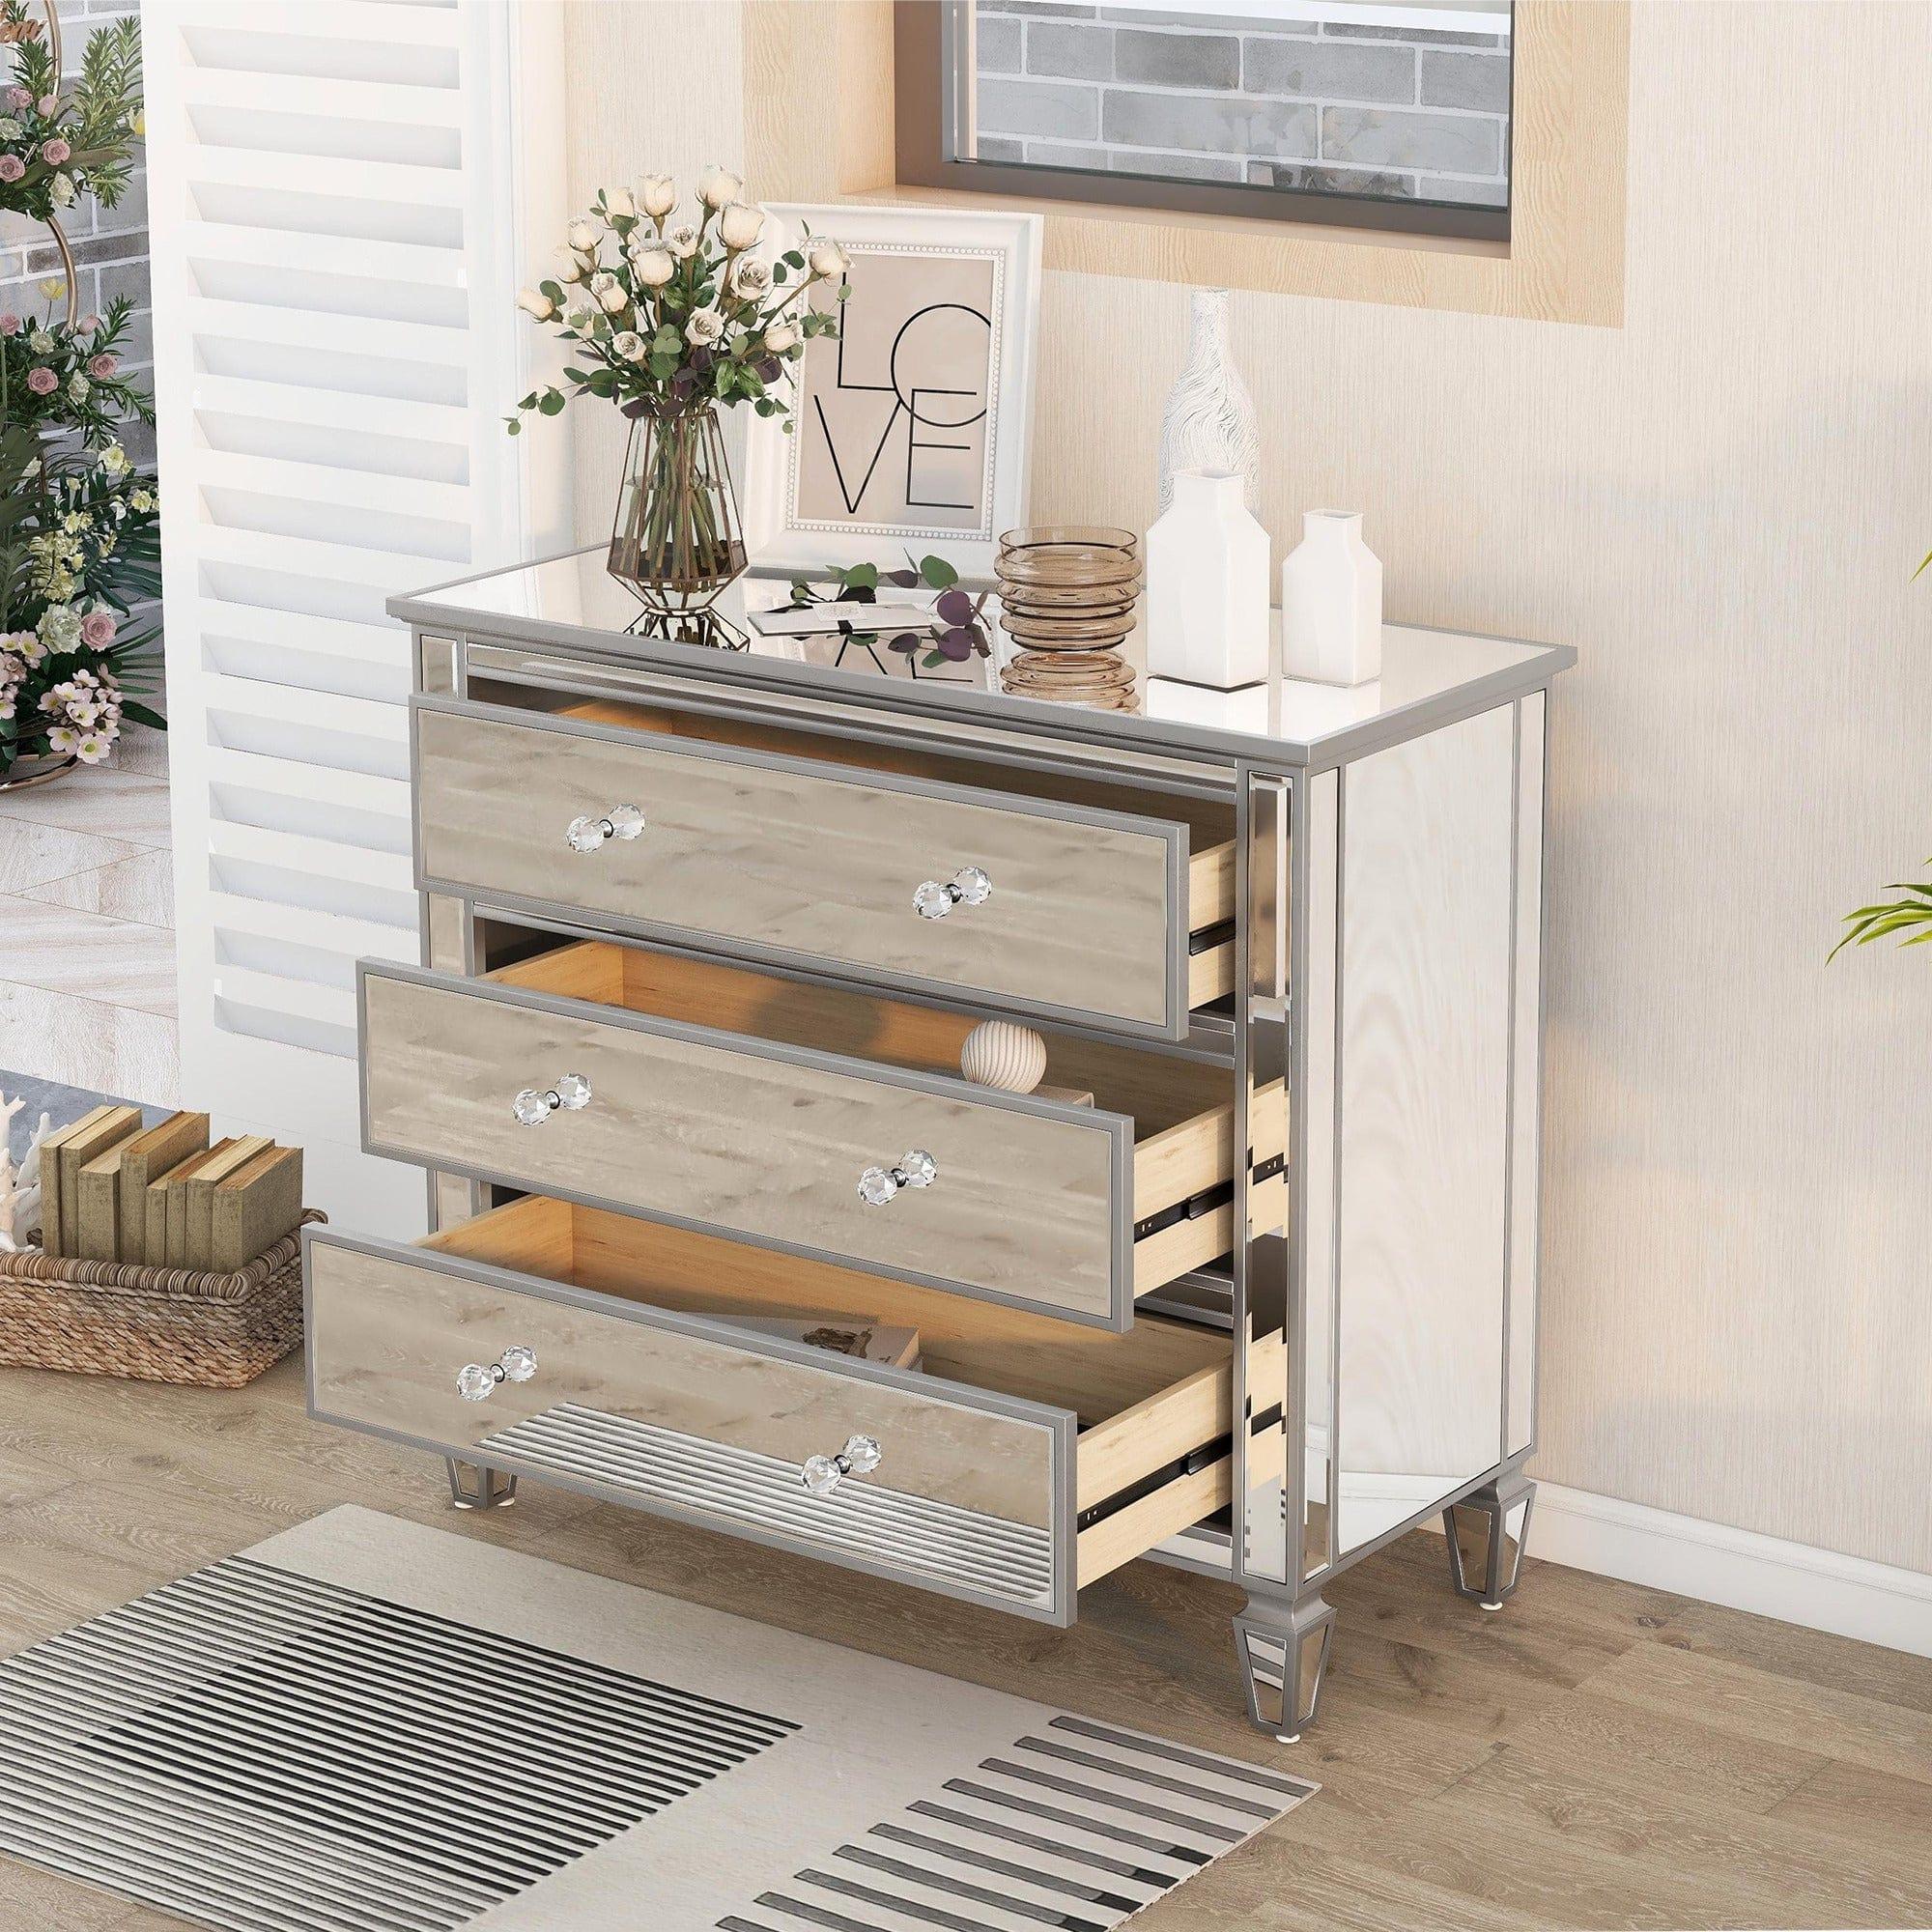 Shop Elegant Mirrored Chest with 3 Drawers, Modern Silver Finished Chest for Living Room Bedroom Mademoiselle Home Decor